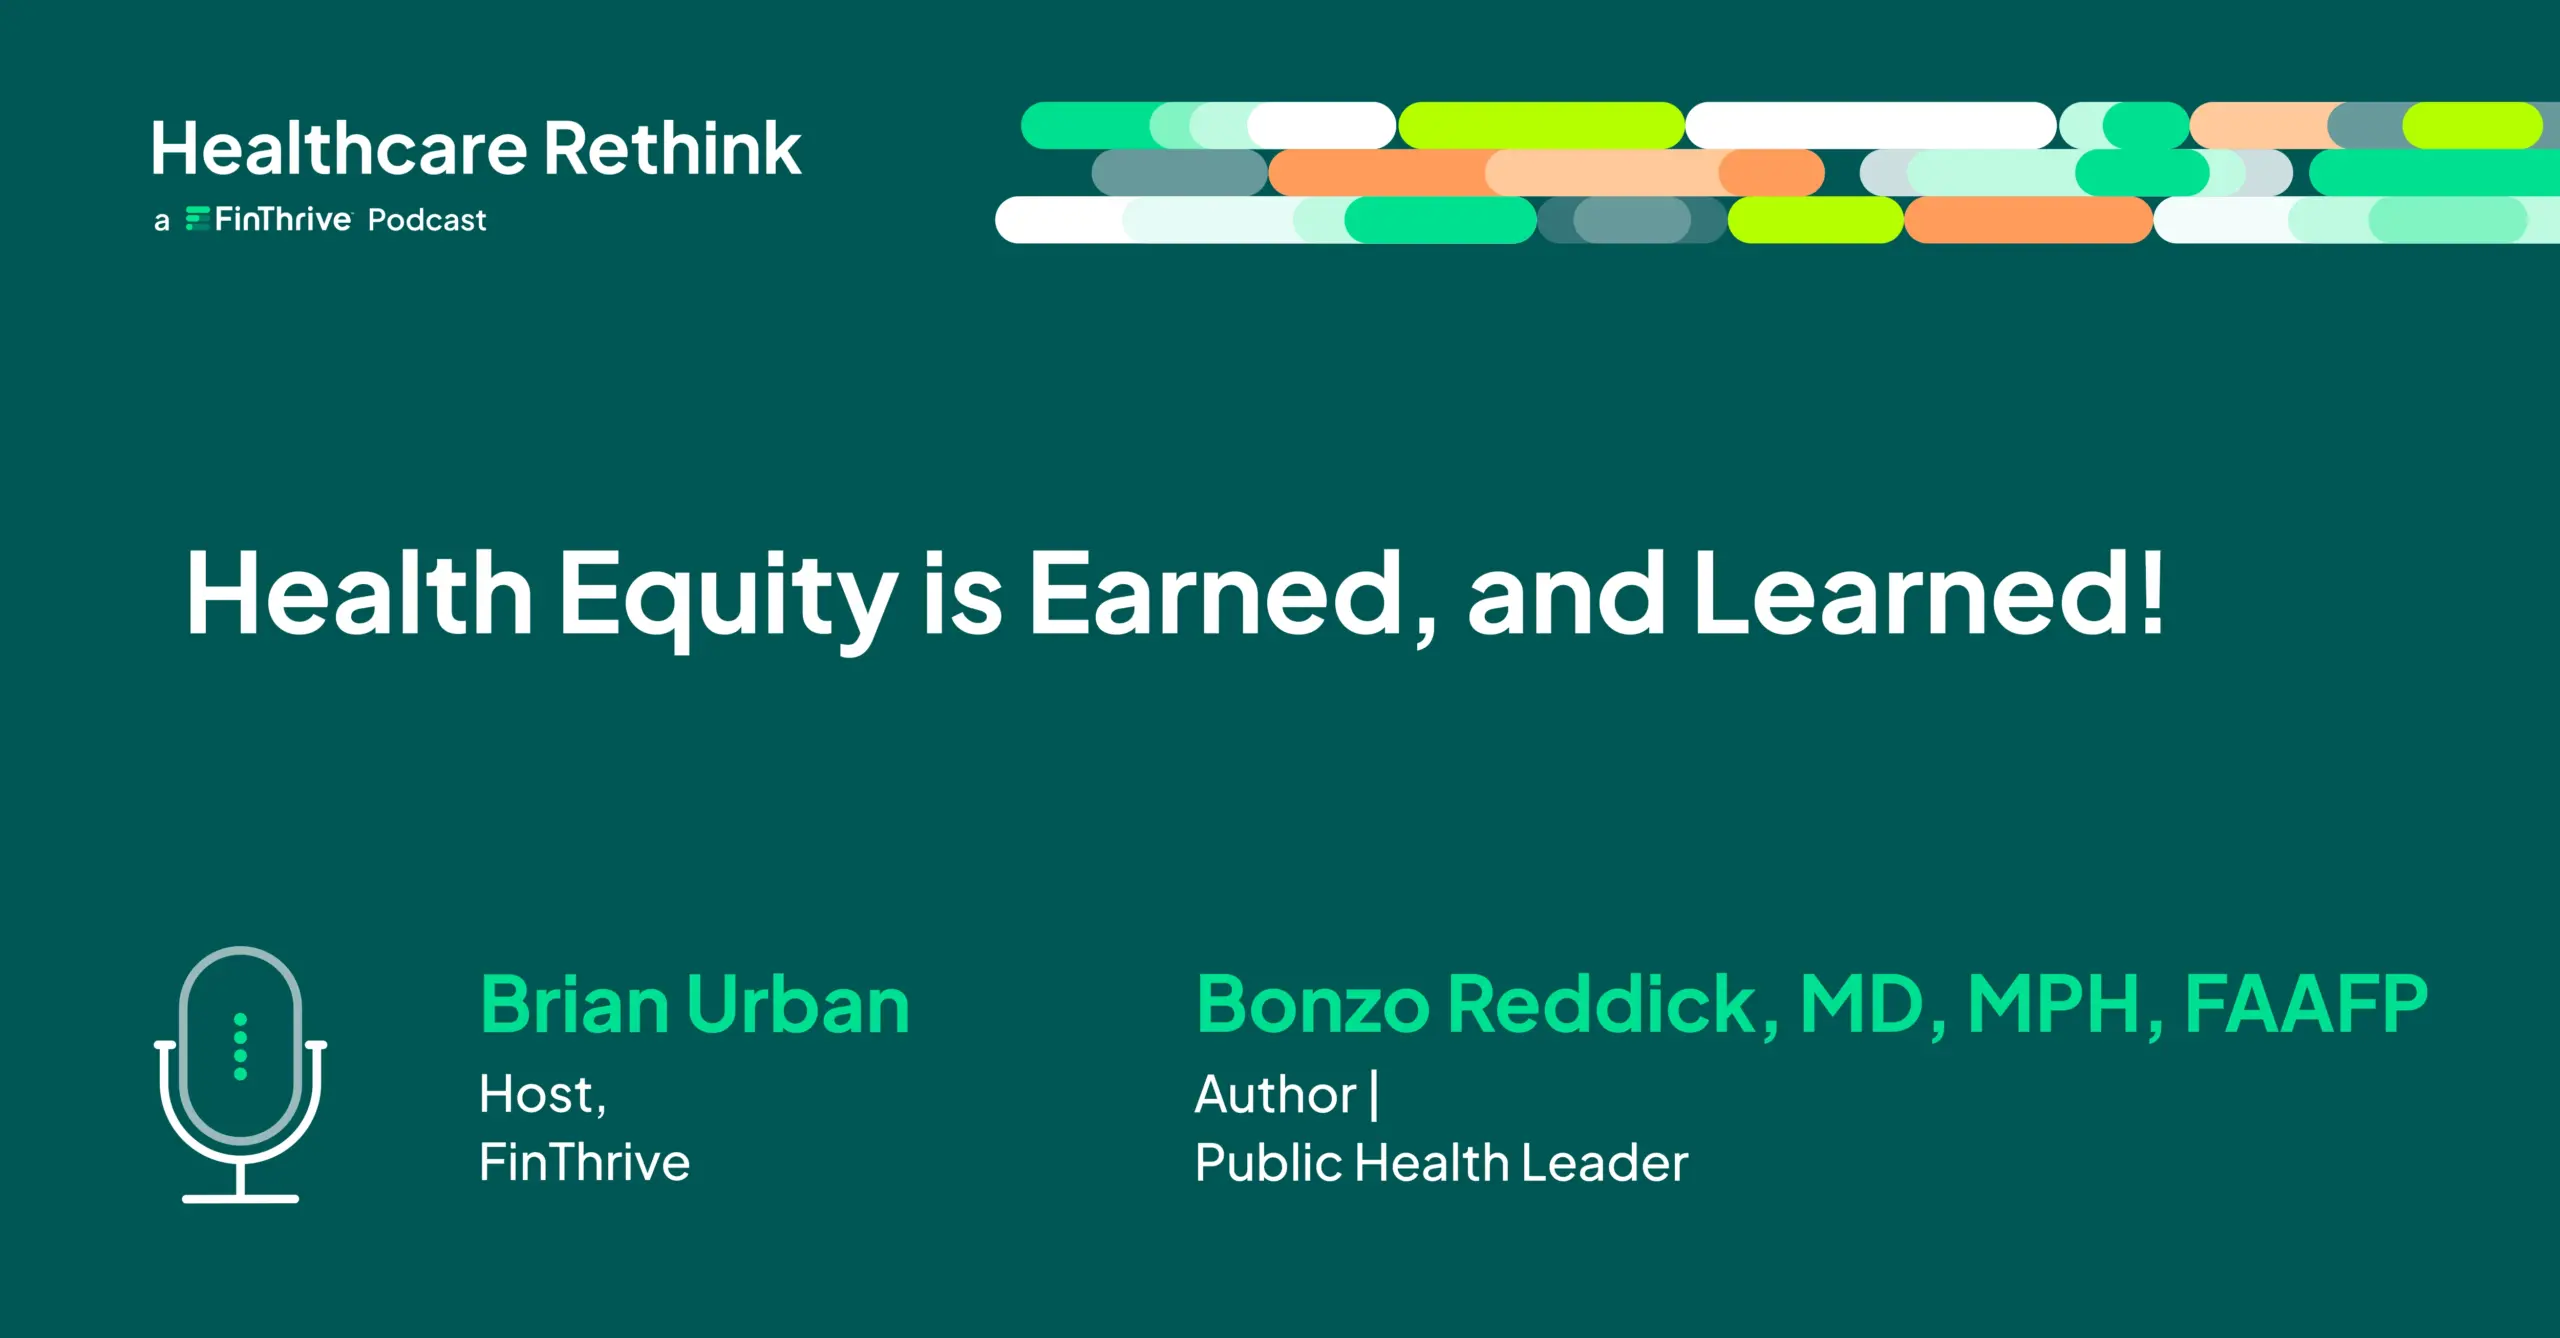 Achieving Health Equity through Effort and Education!